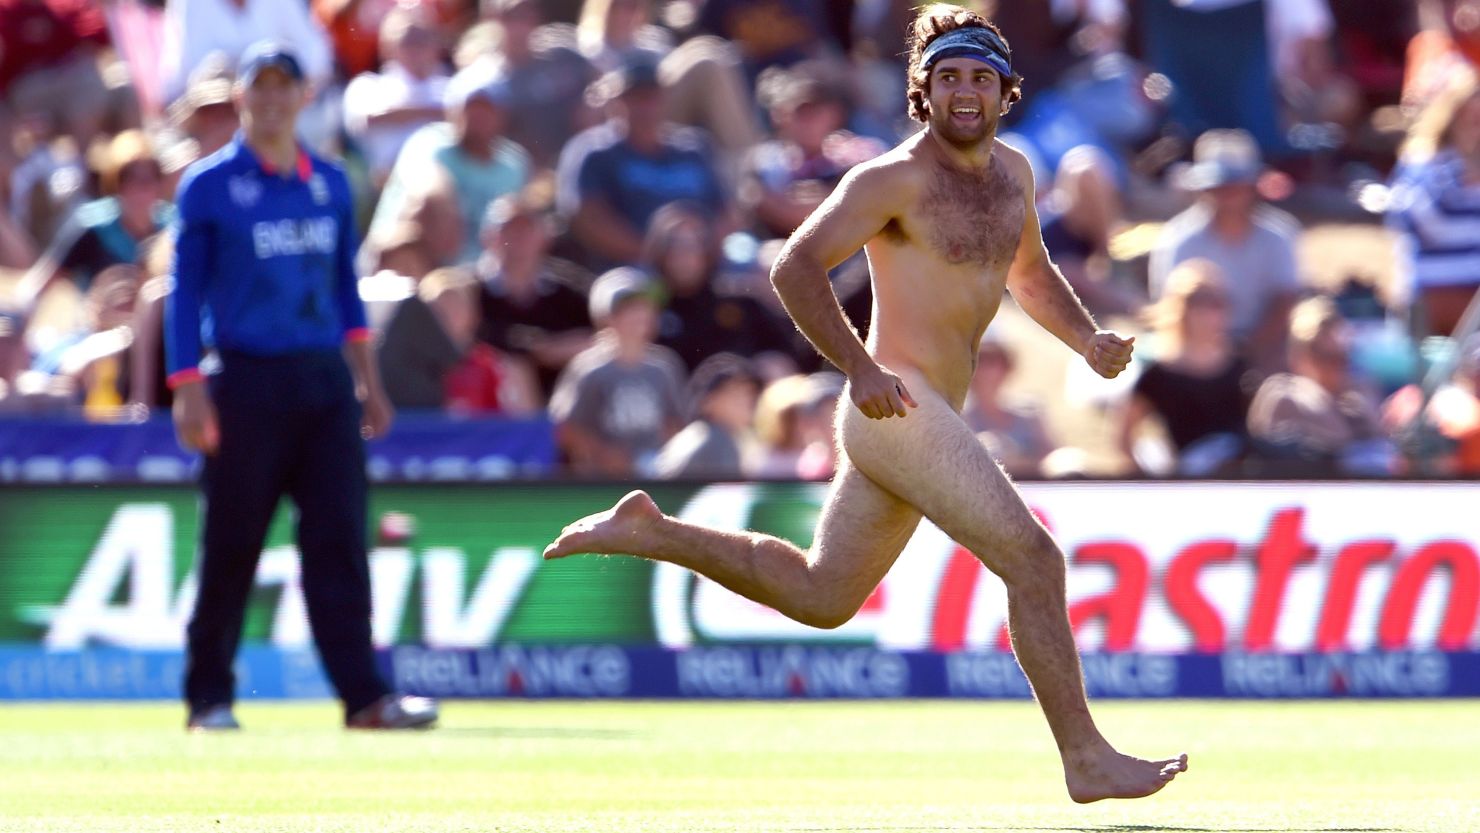 Streakers in Victoria could be punished with up to two months of jail time.